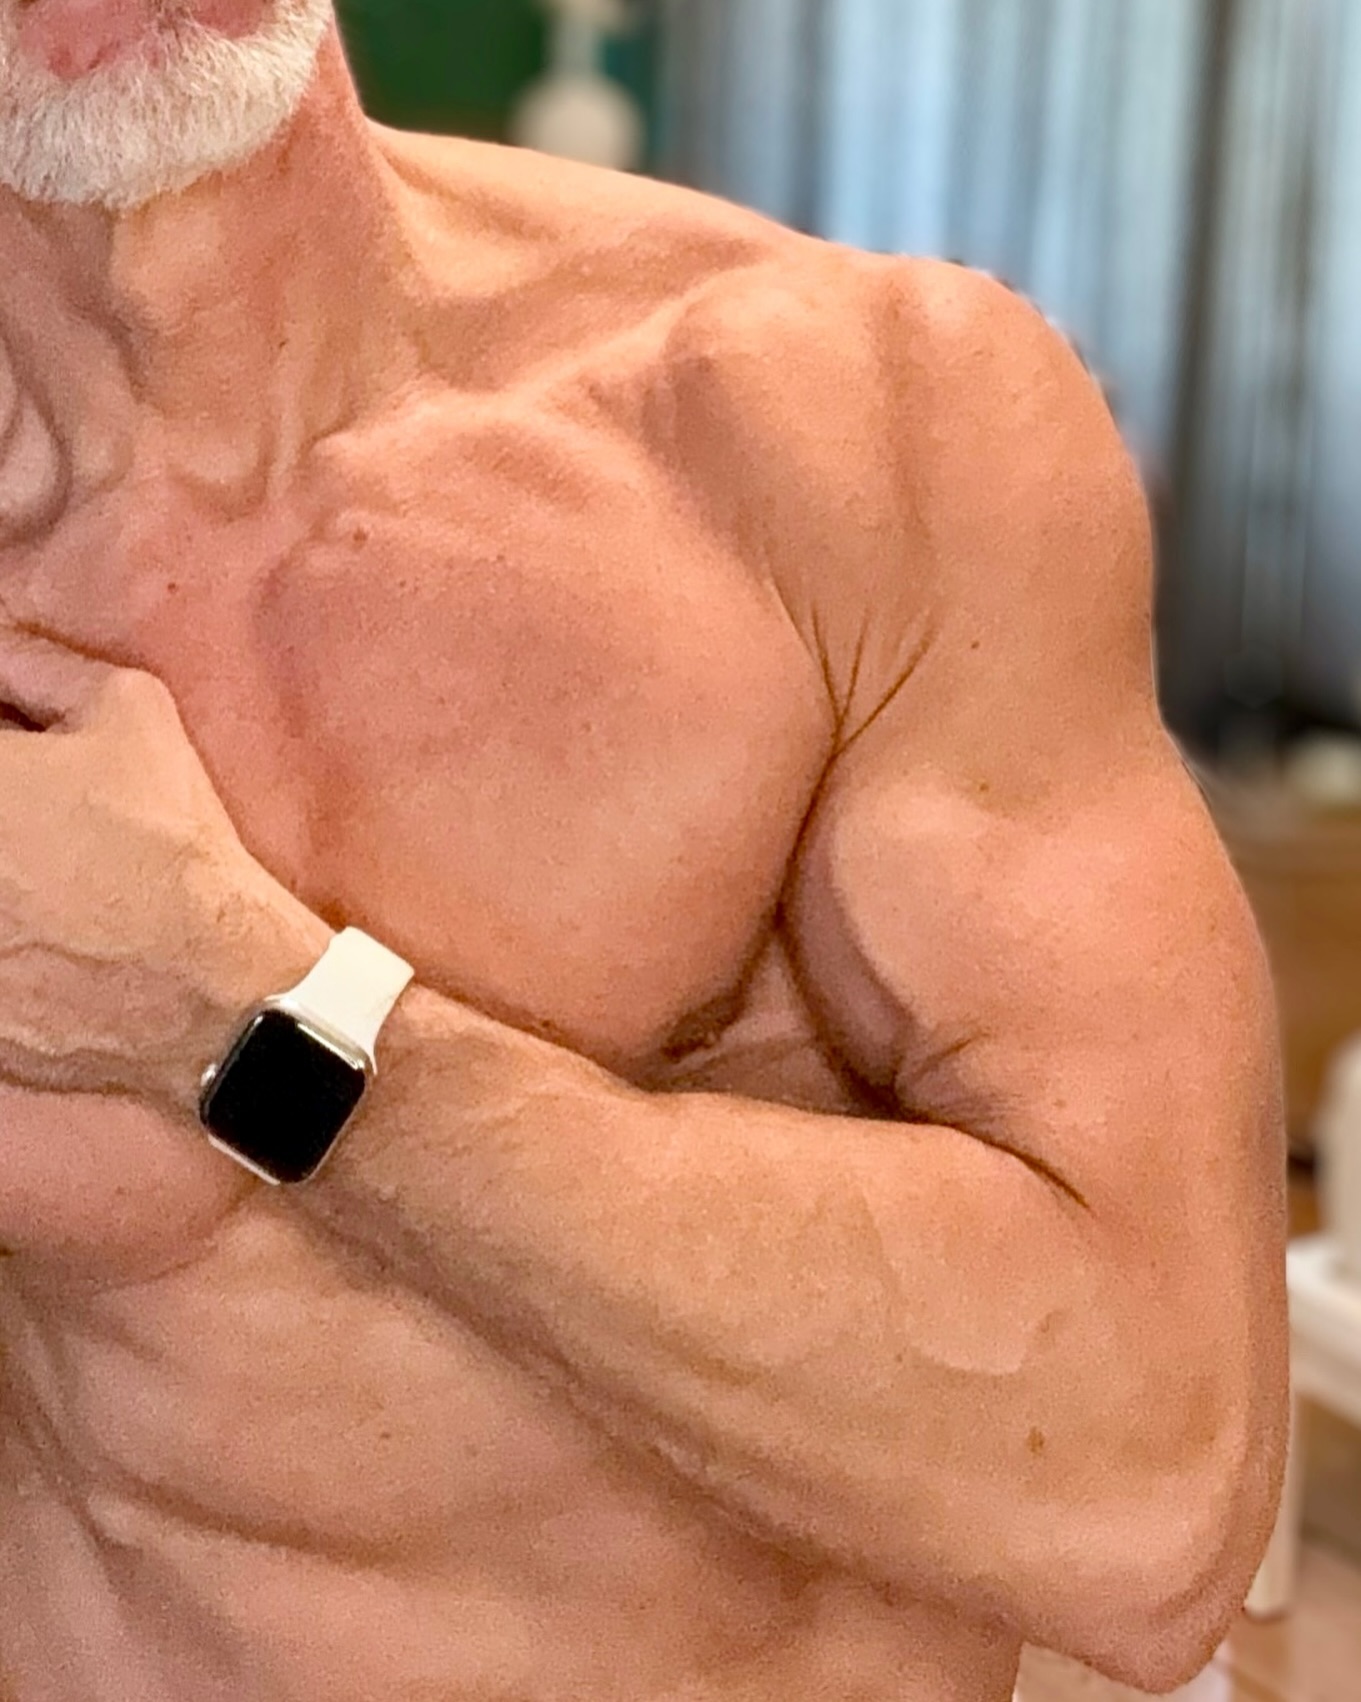 It’s a veiny day

#daddy #silverfox #vegan #fitover55 #gay #gayfit #veganfit #workoutmotivation #arms #biceps